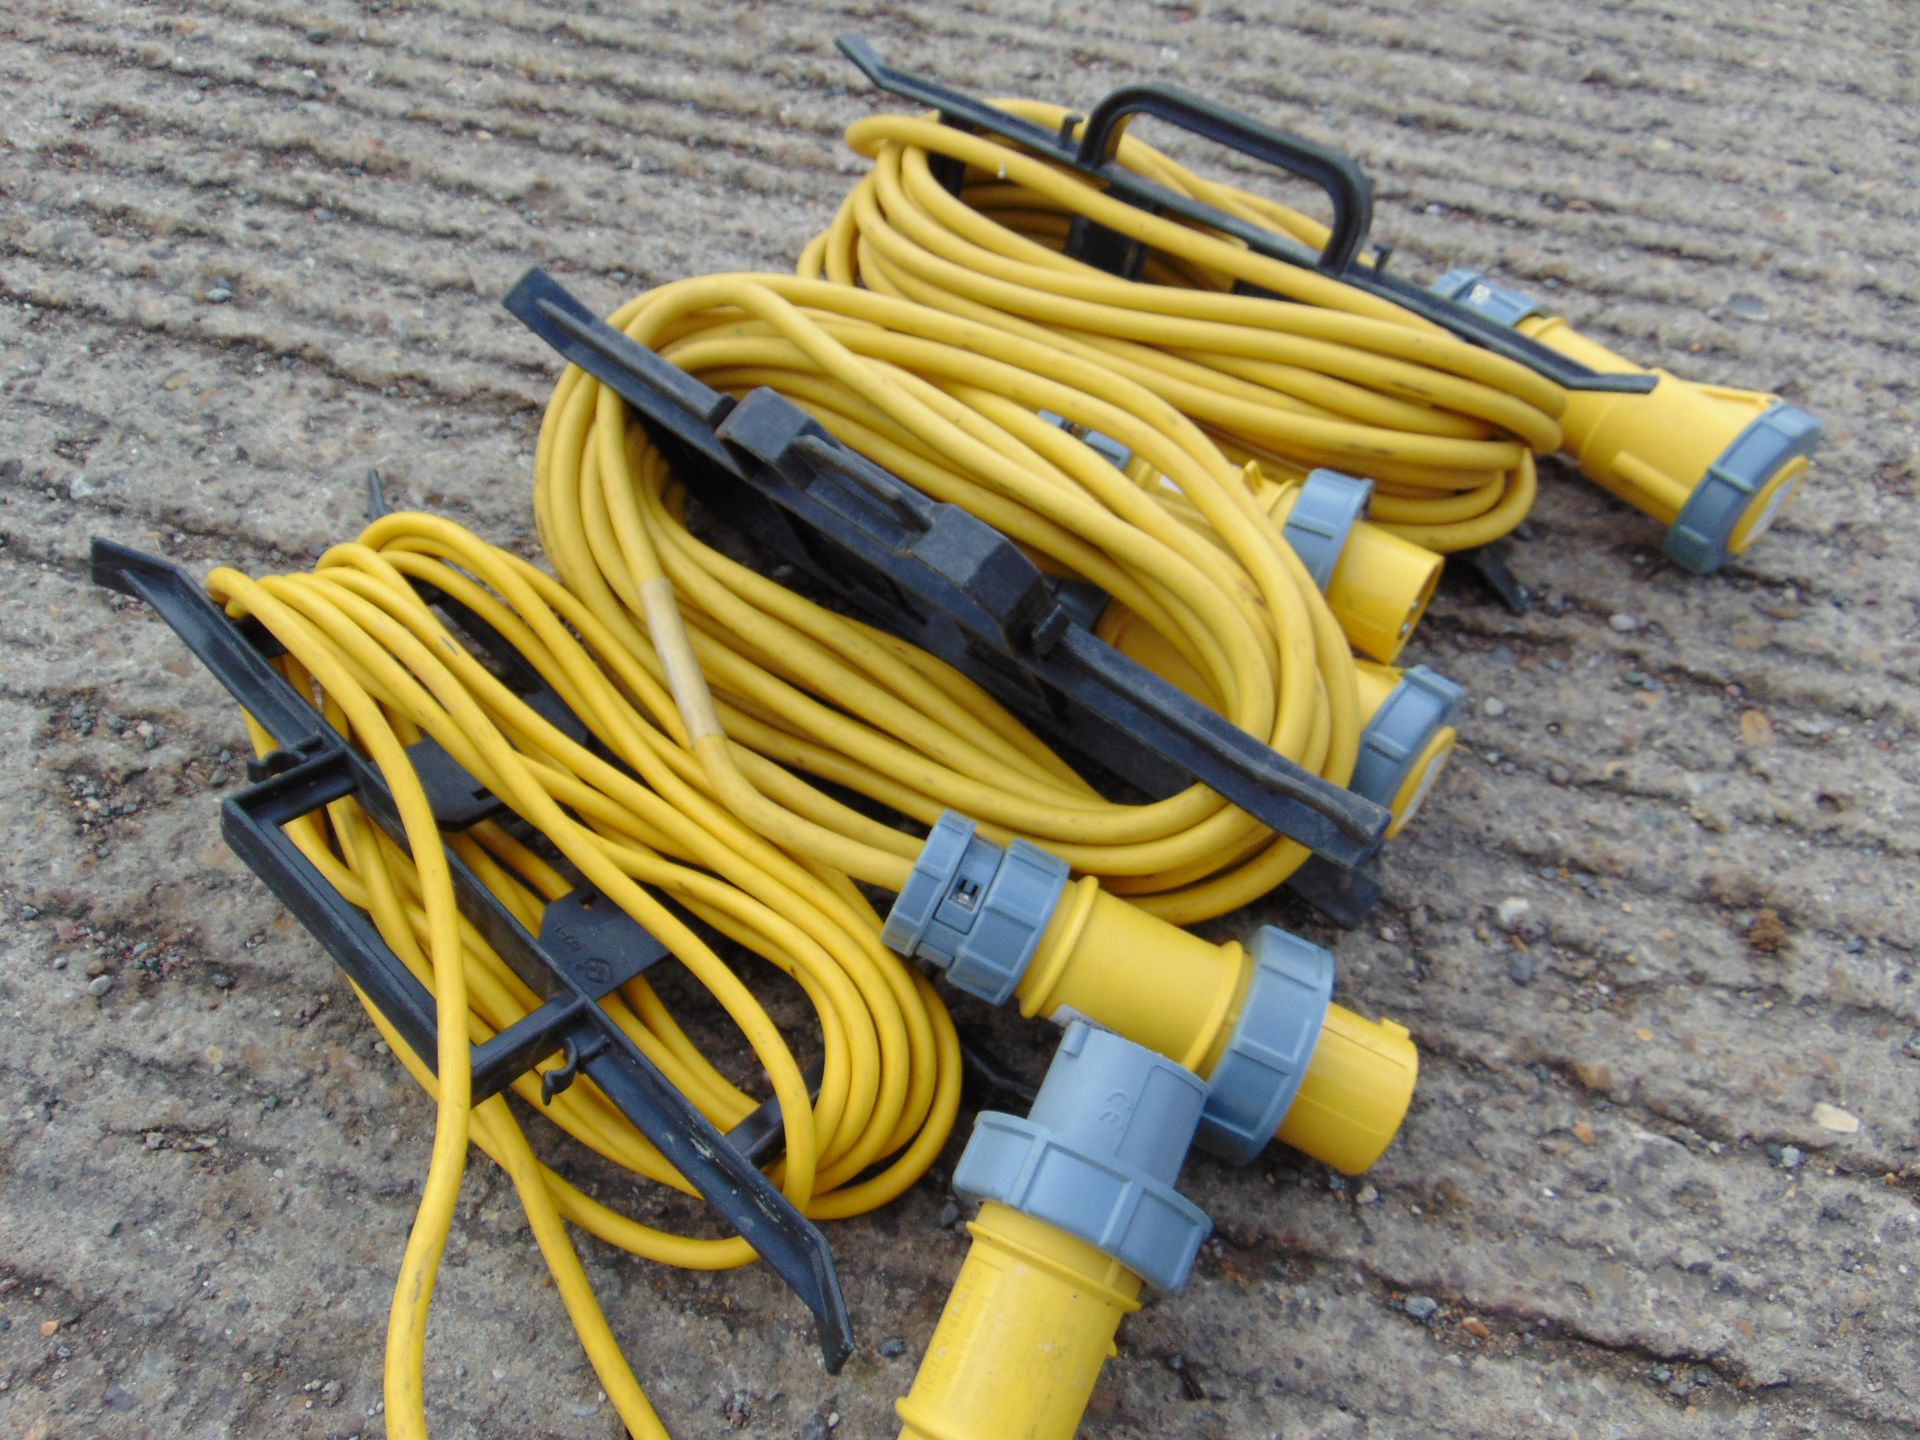 3 x 110V Extension Cable Assys - Image 2 of 4